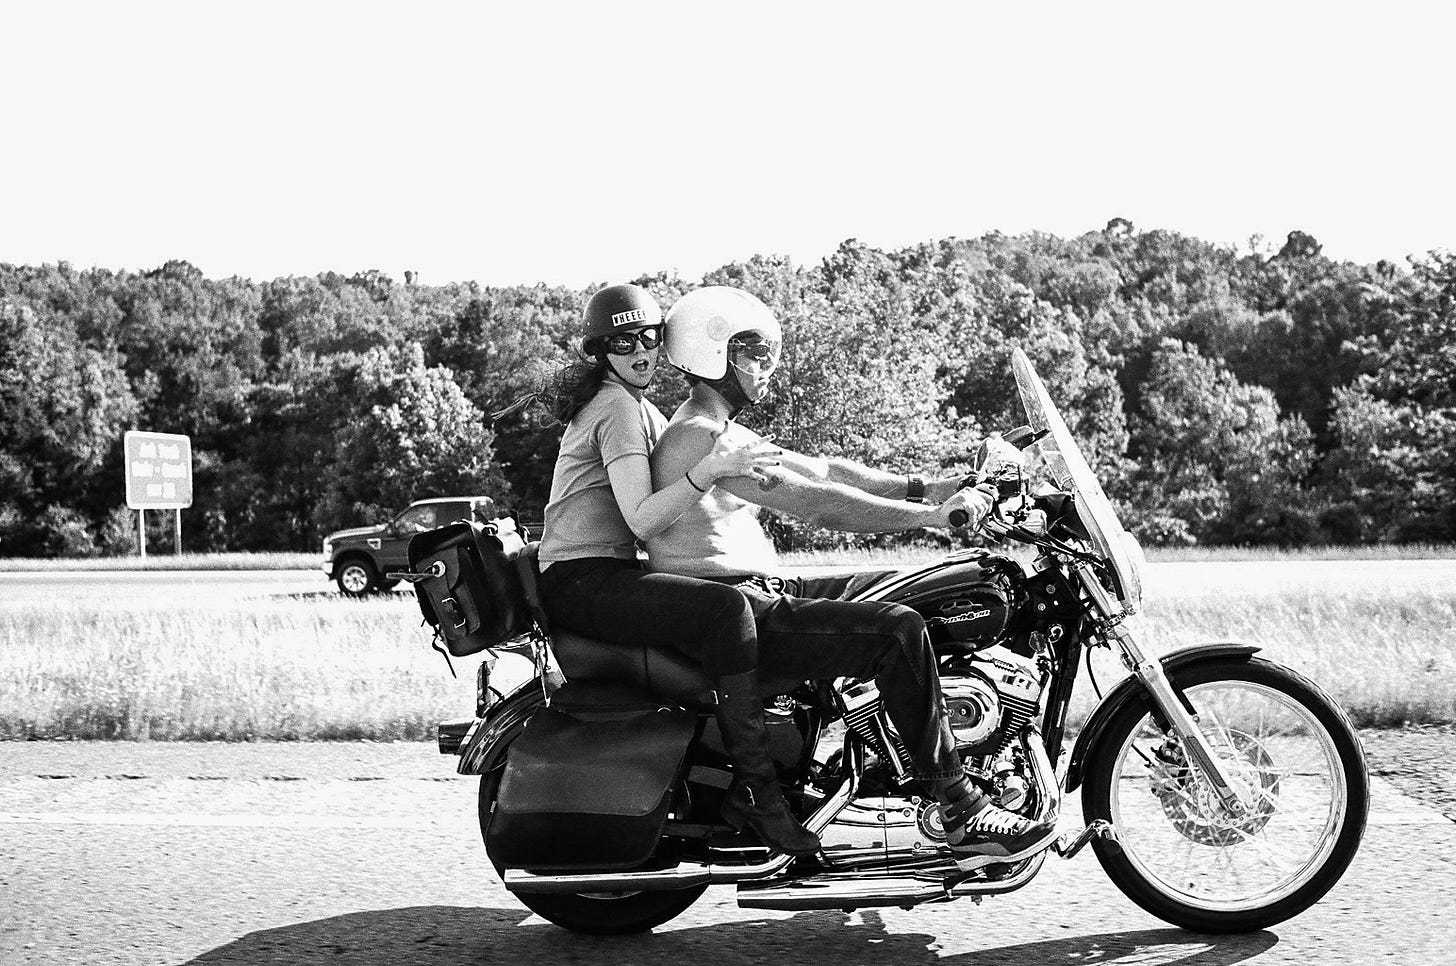 Derrick driving his motorcycle with Amber on the back. The photo is taken from the side of the bike. Derrick is shirtless, looking ahead at the road. Amber holds onto Derrick but is looking to the camera. They both wear helmets. Amber's helmet has a sticker on it that says "WHEEEE." 